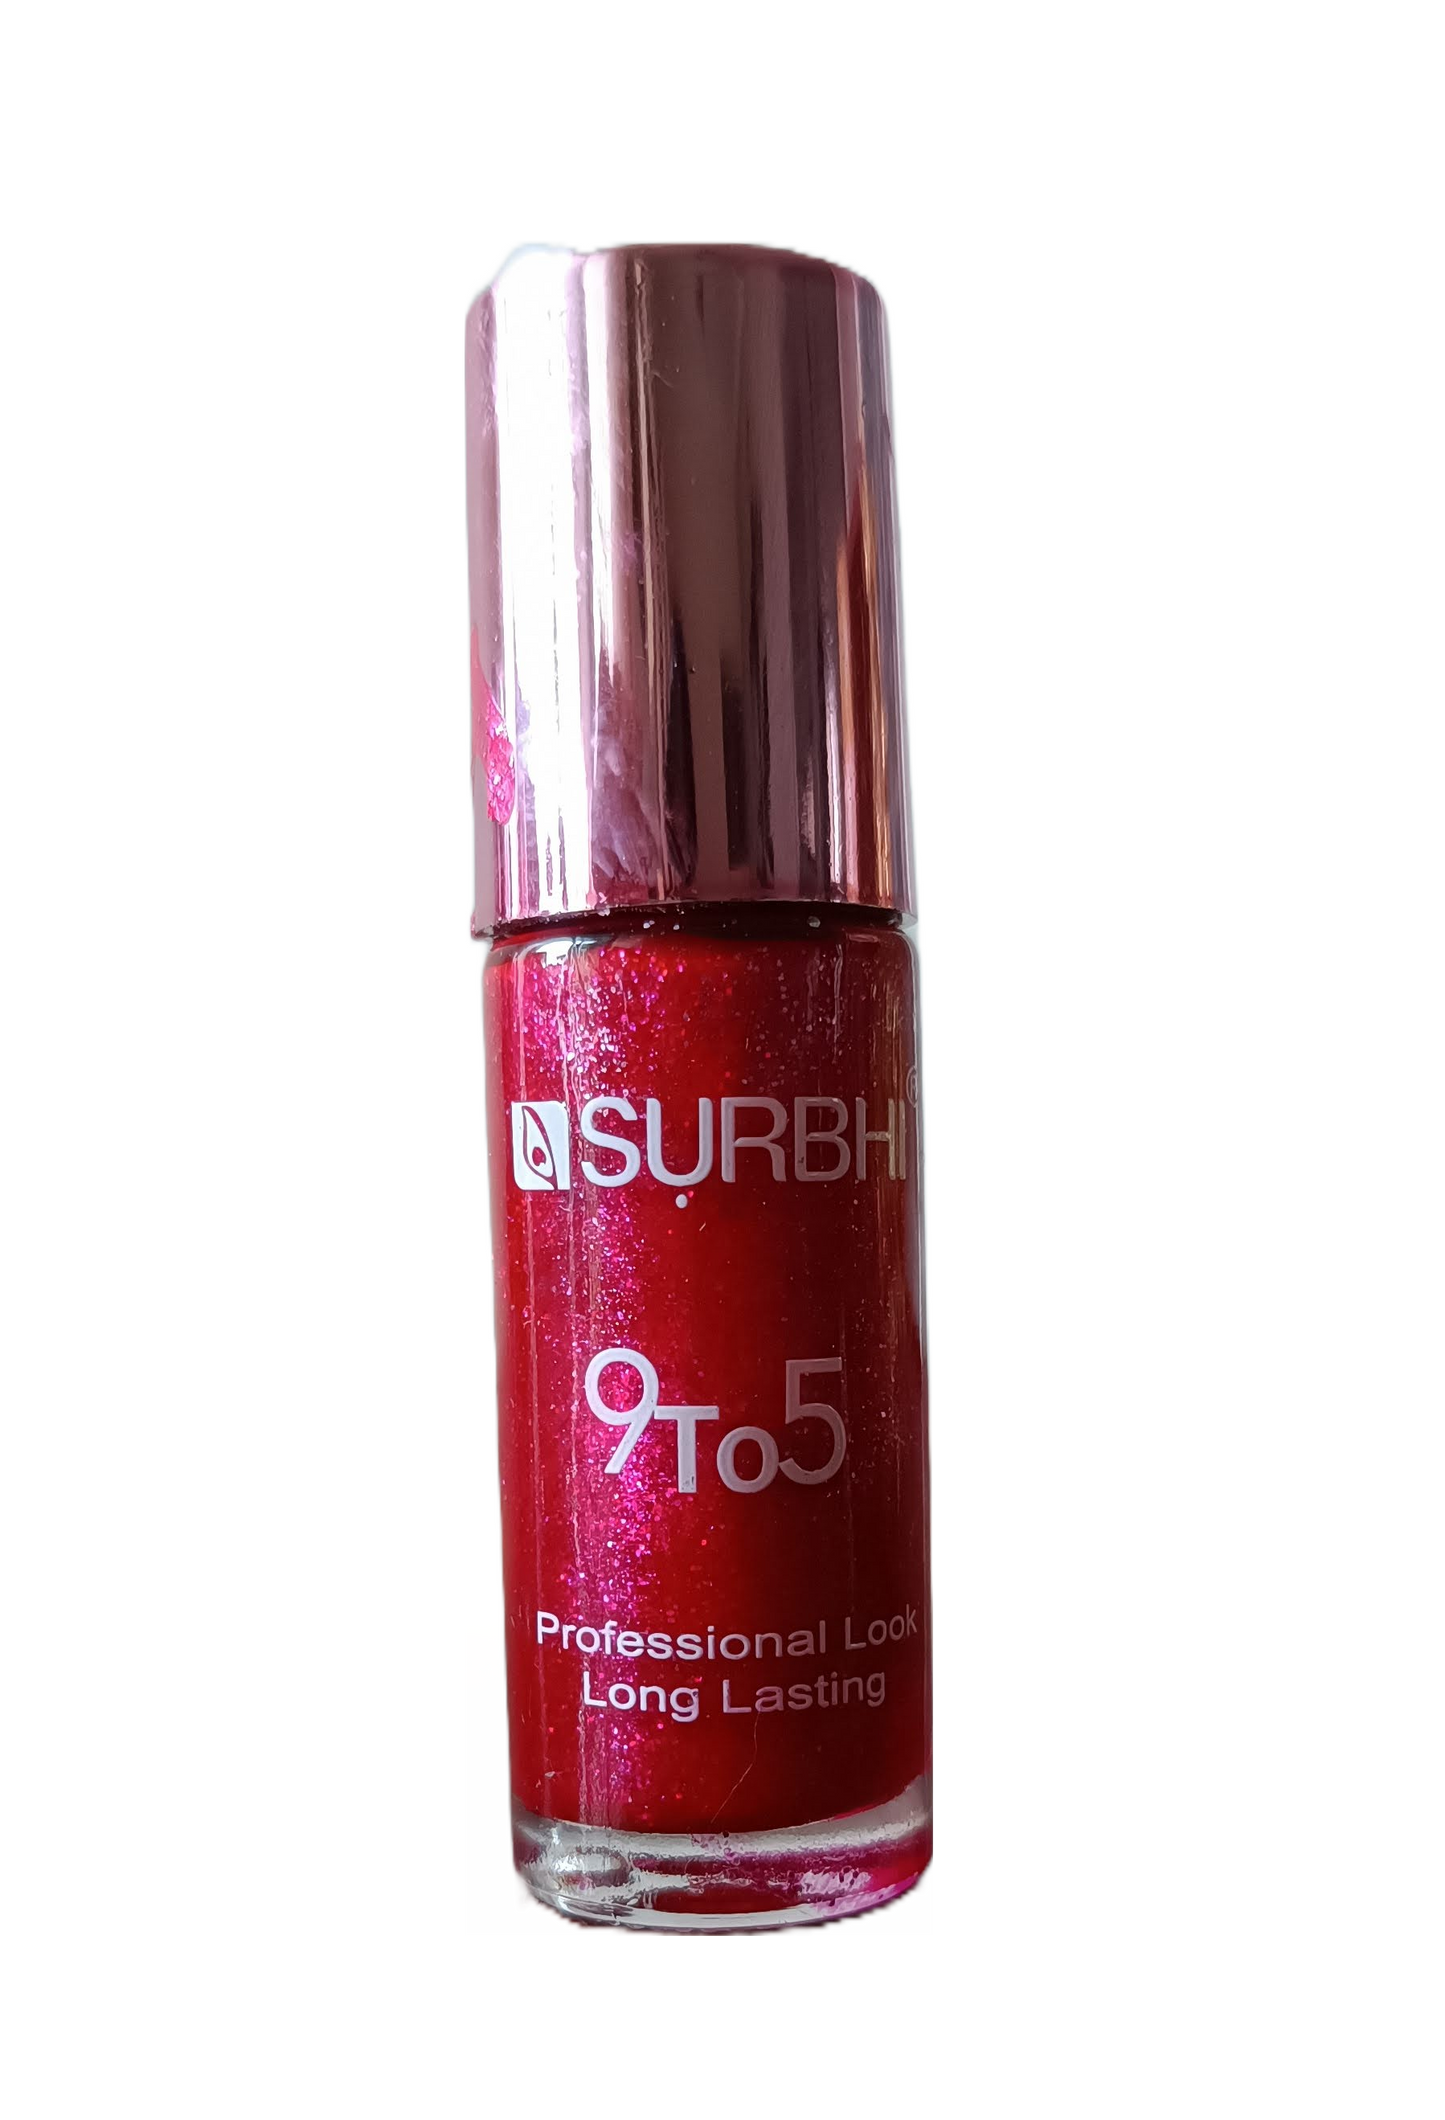 9 to 5 Professional Look Long Lasting Nail Paint - Shimmer Red - 8 ml